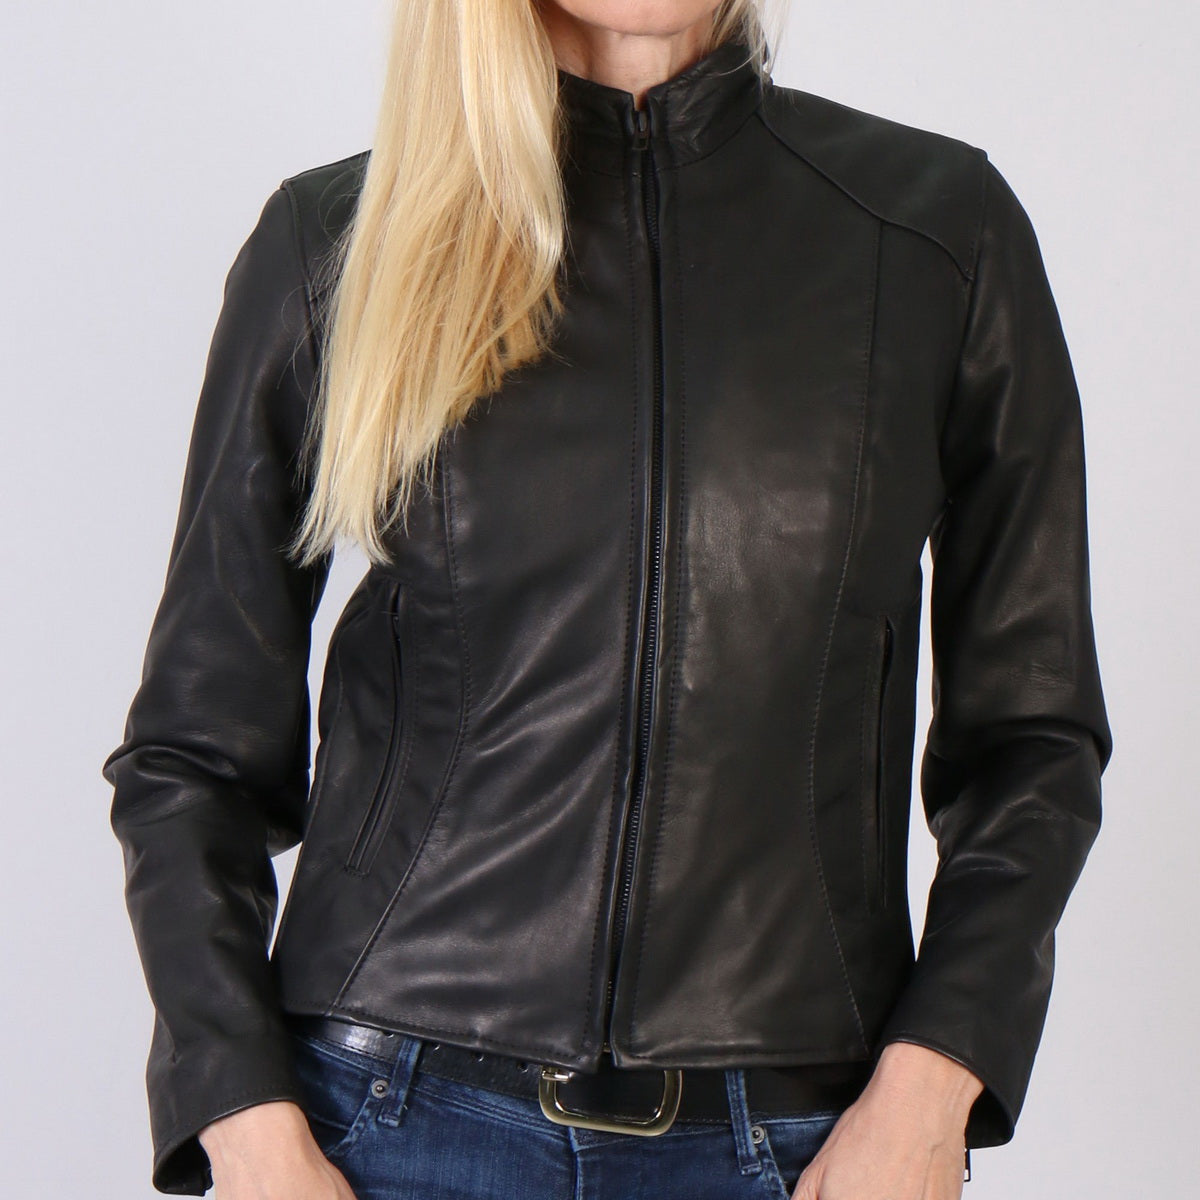 Hot Leathers JKL5003 USA Made Women's Black Clean Cut Leather Jacket